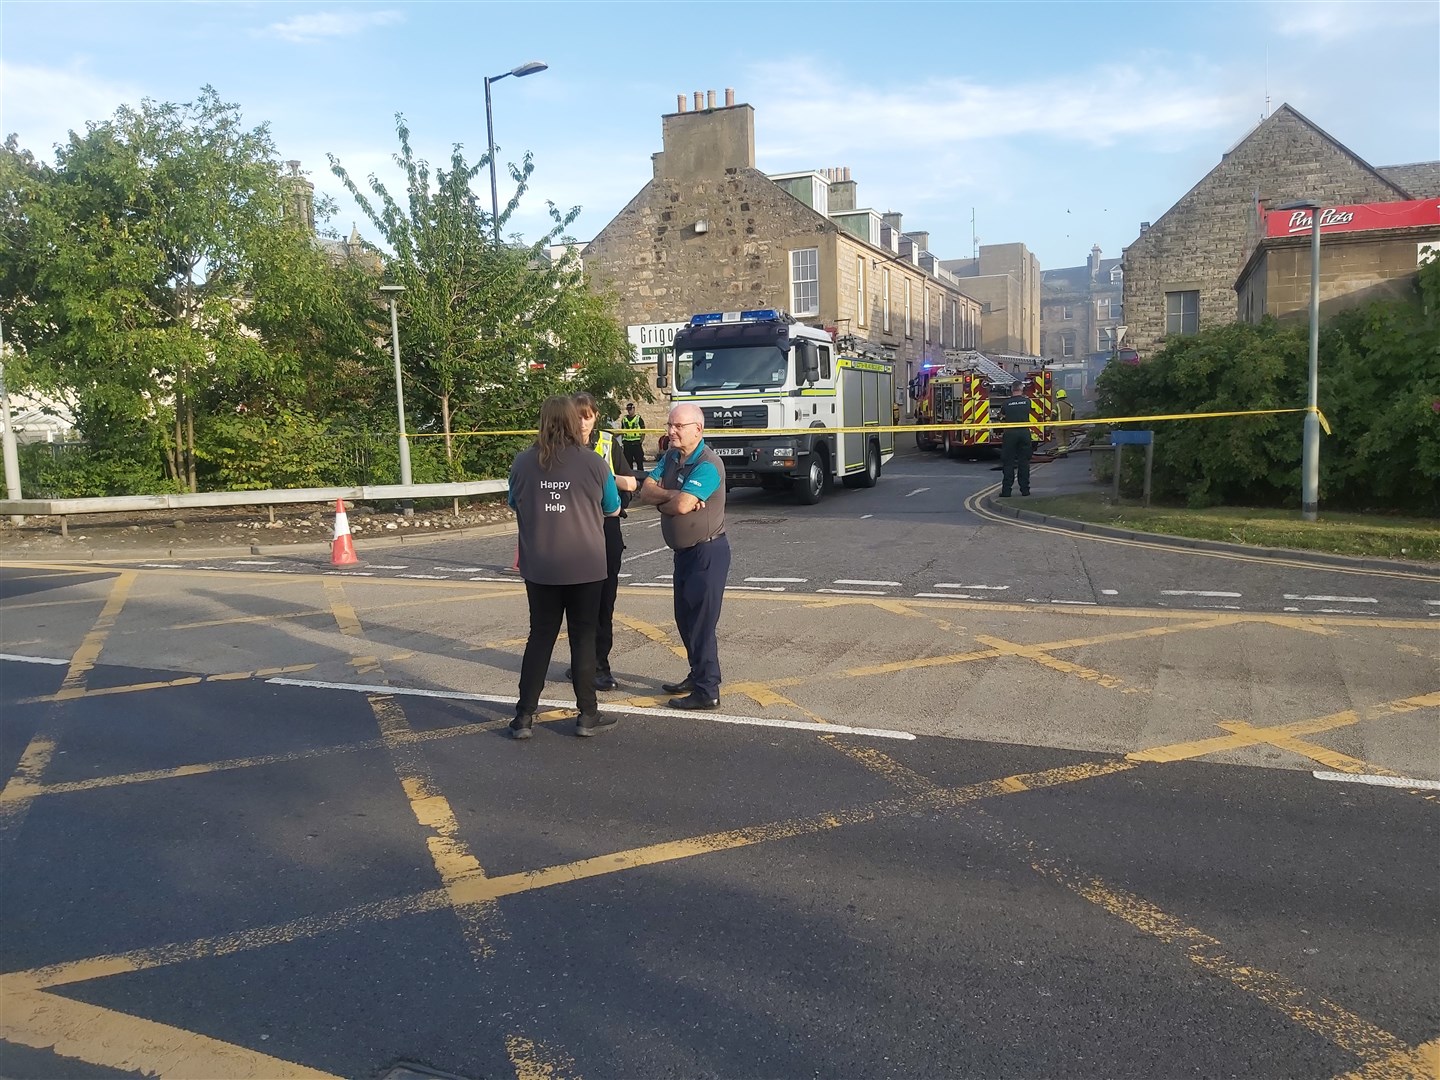 Poundland manager Gerry McAloon and another staff member talk to a police officer at the scene. Picture: Highland News and Media